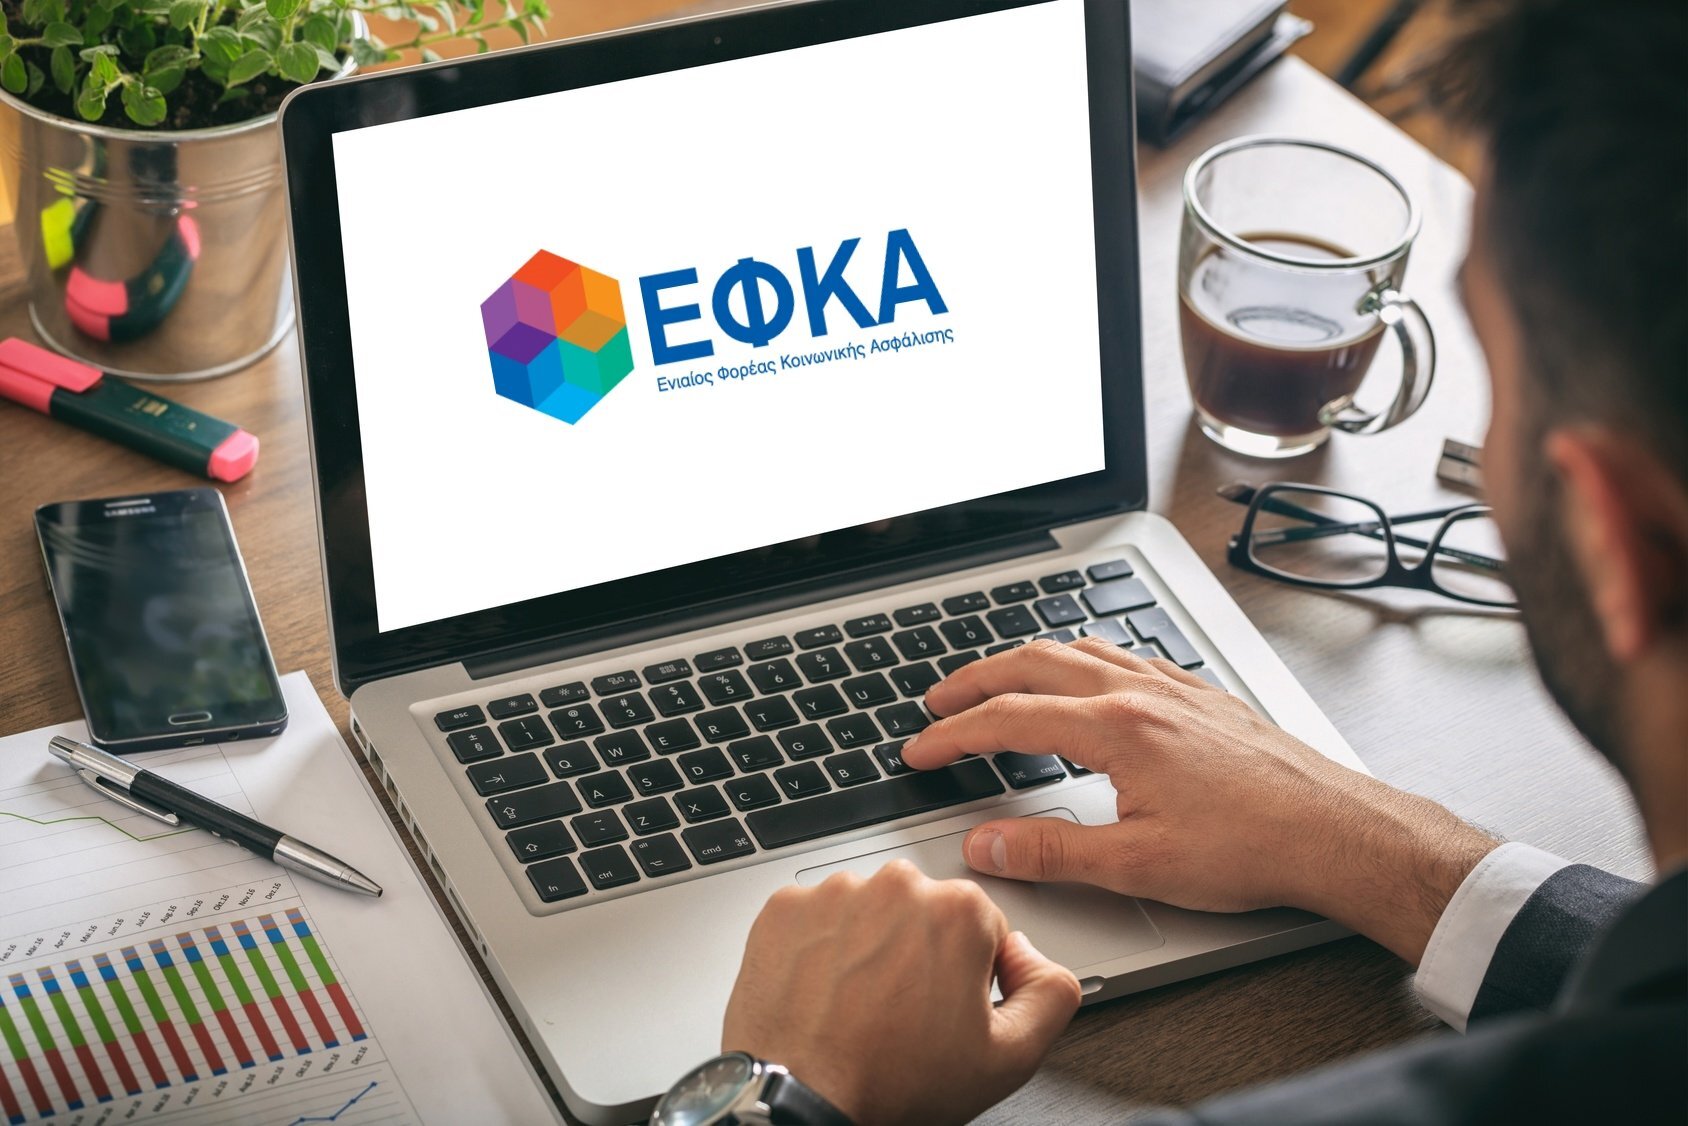 More information about "e-ΕΦΚΑ: Επτά οι ηλεκτρονικές υπηρεσίες για οφειλέτες"